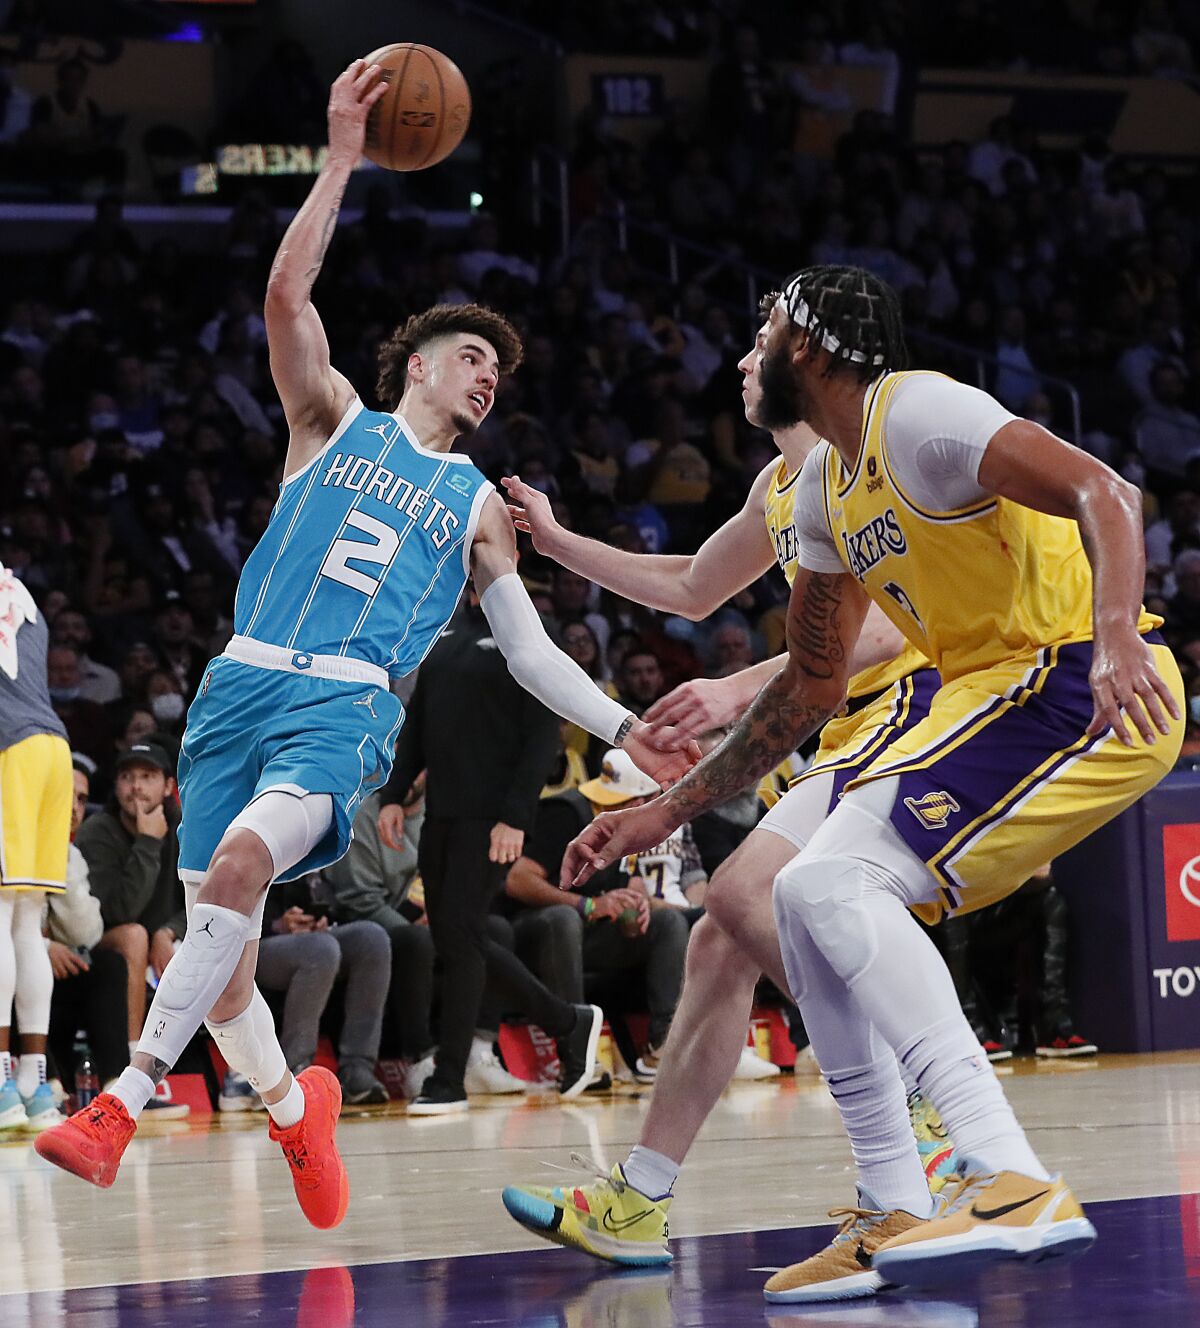 Hornets guard LaMelo Ball twists his body to make a pass against the Lakers.